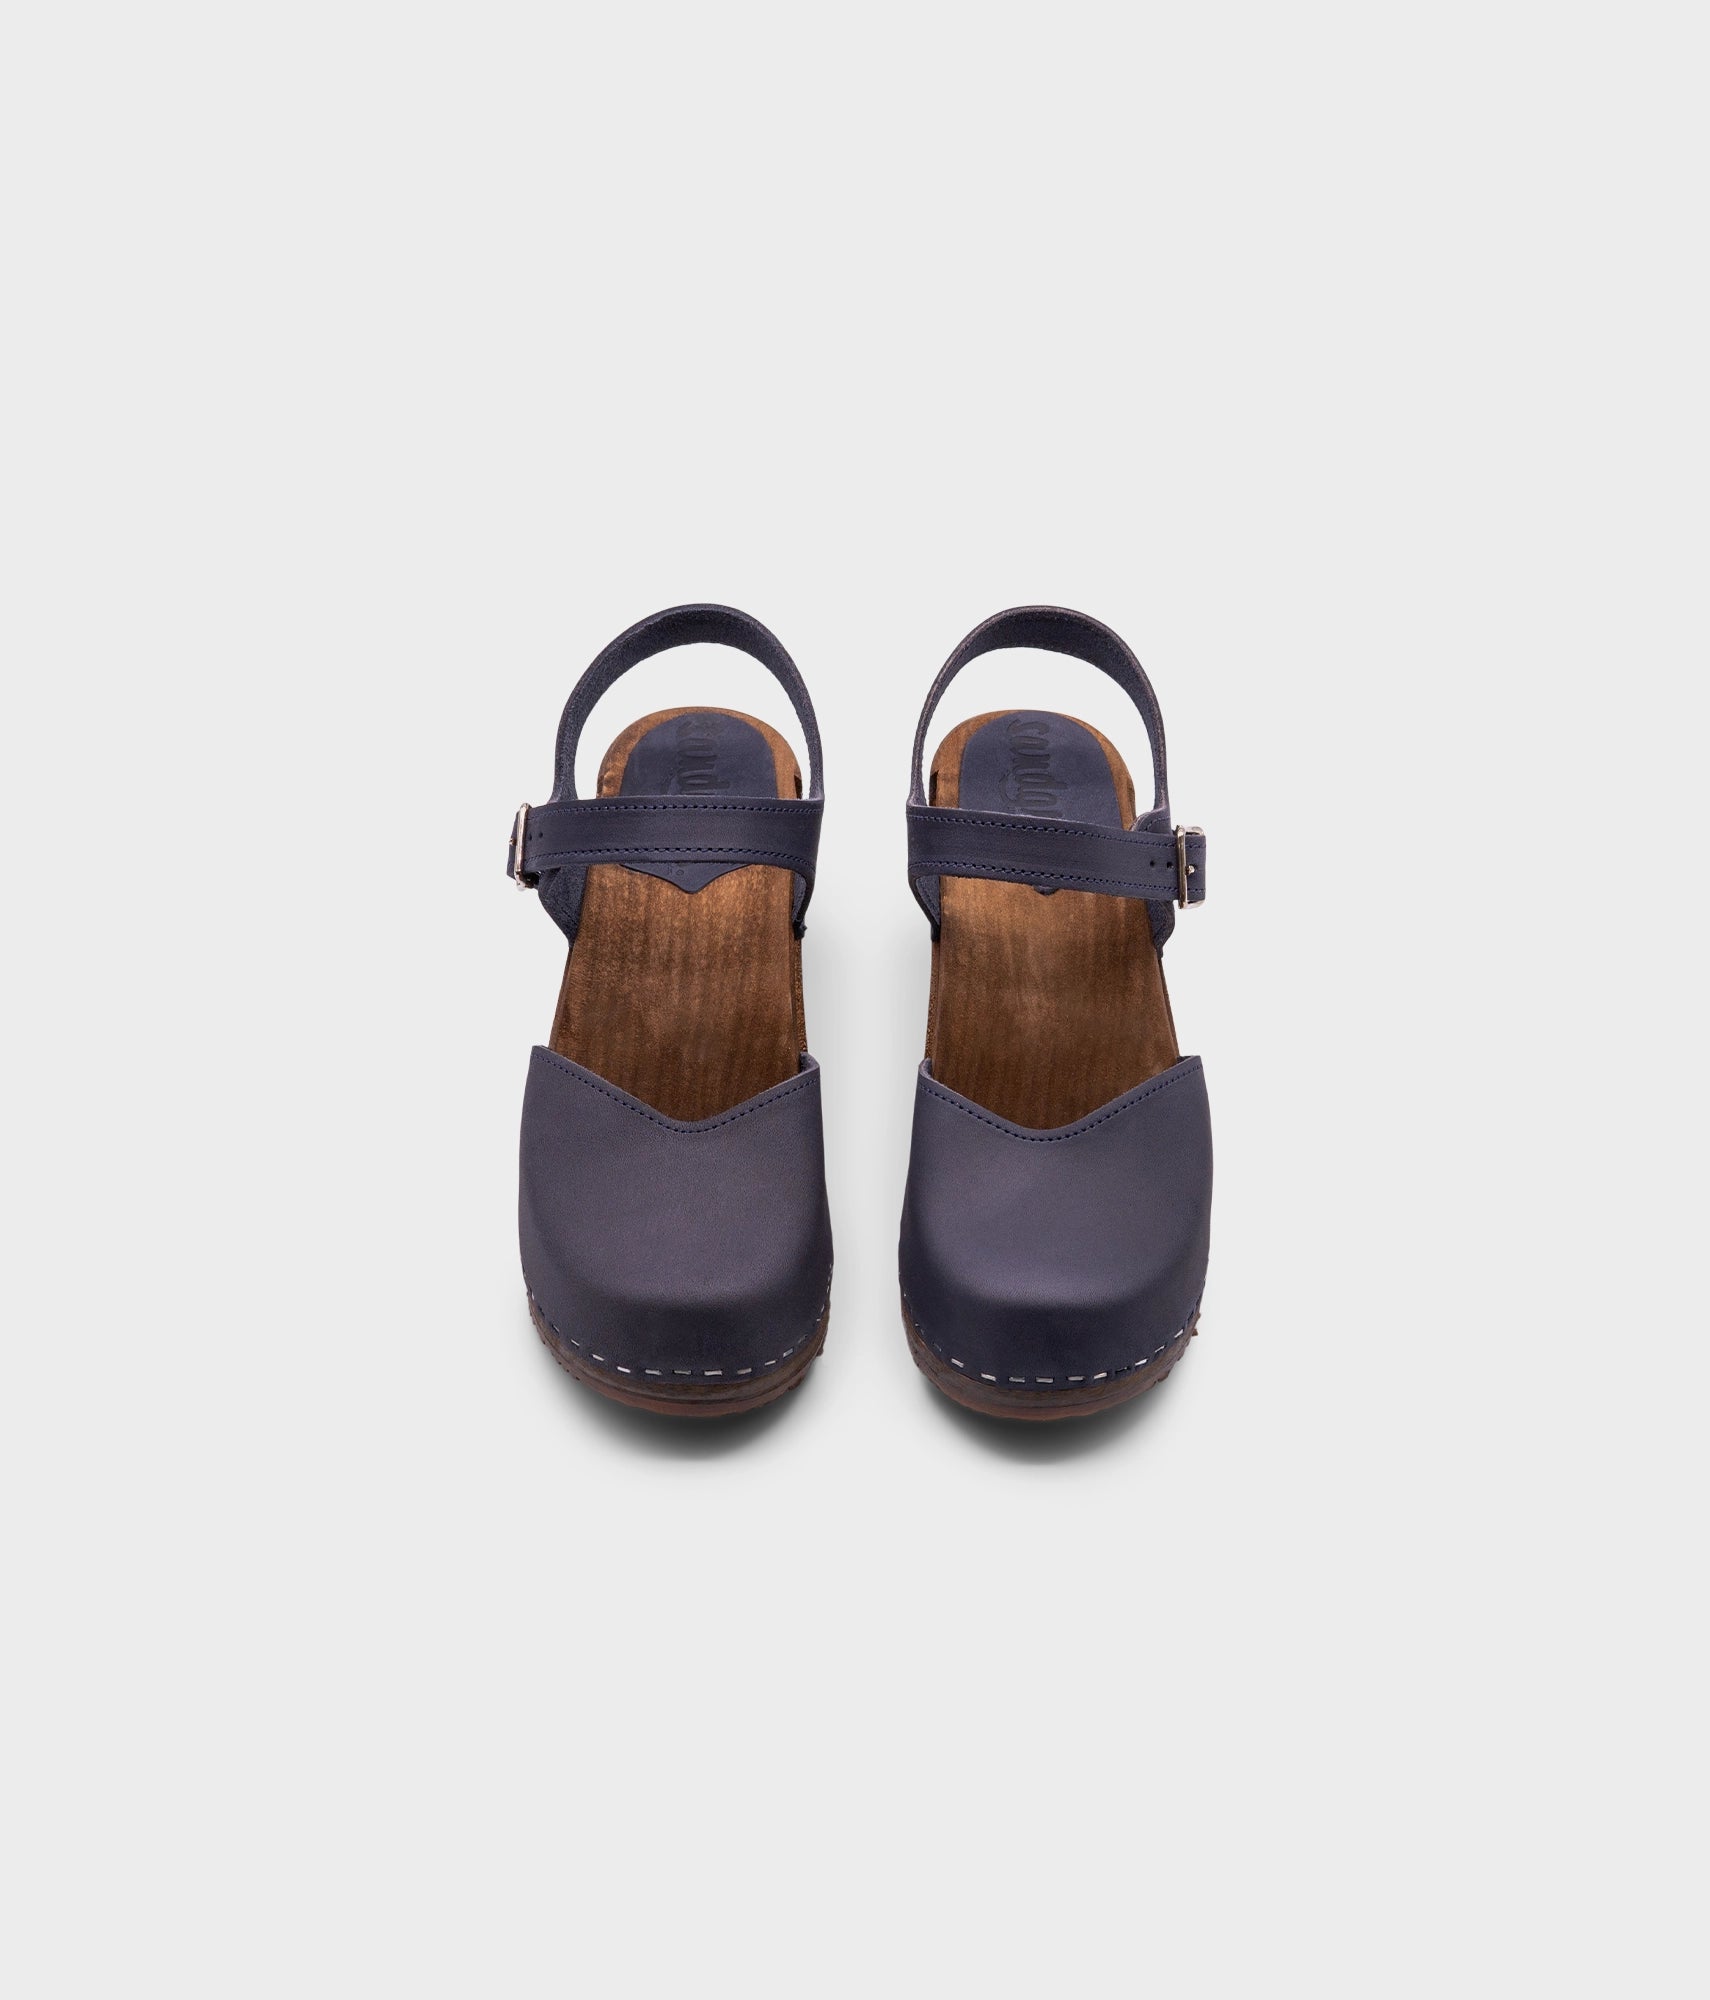 high heeled closed-toe clog sandal in navy blue nubuck leather stapled on a dark wooden base